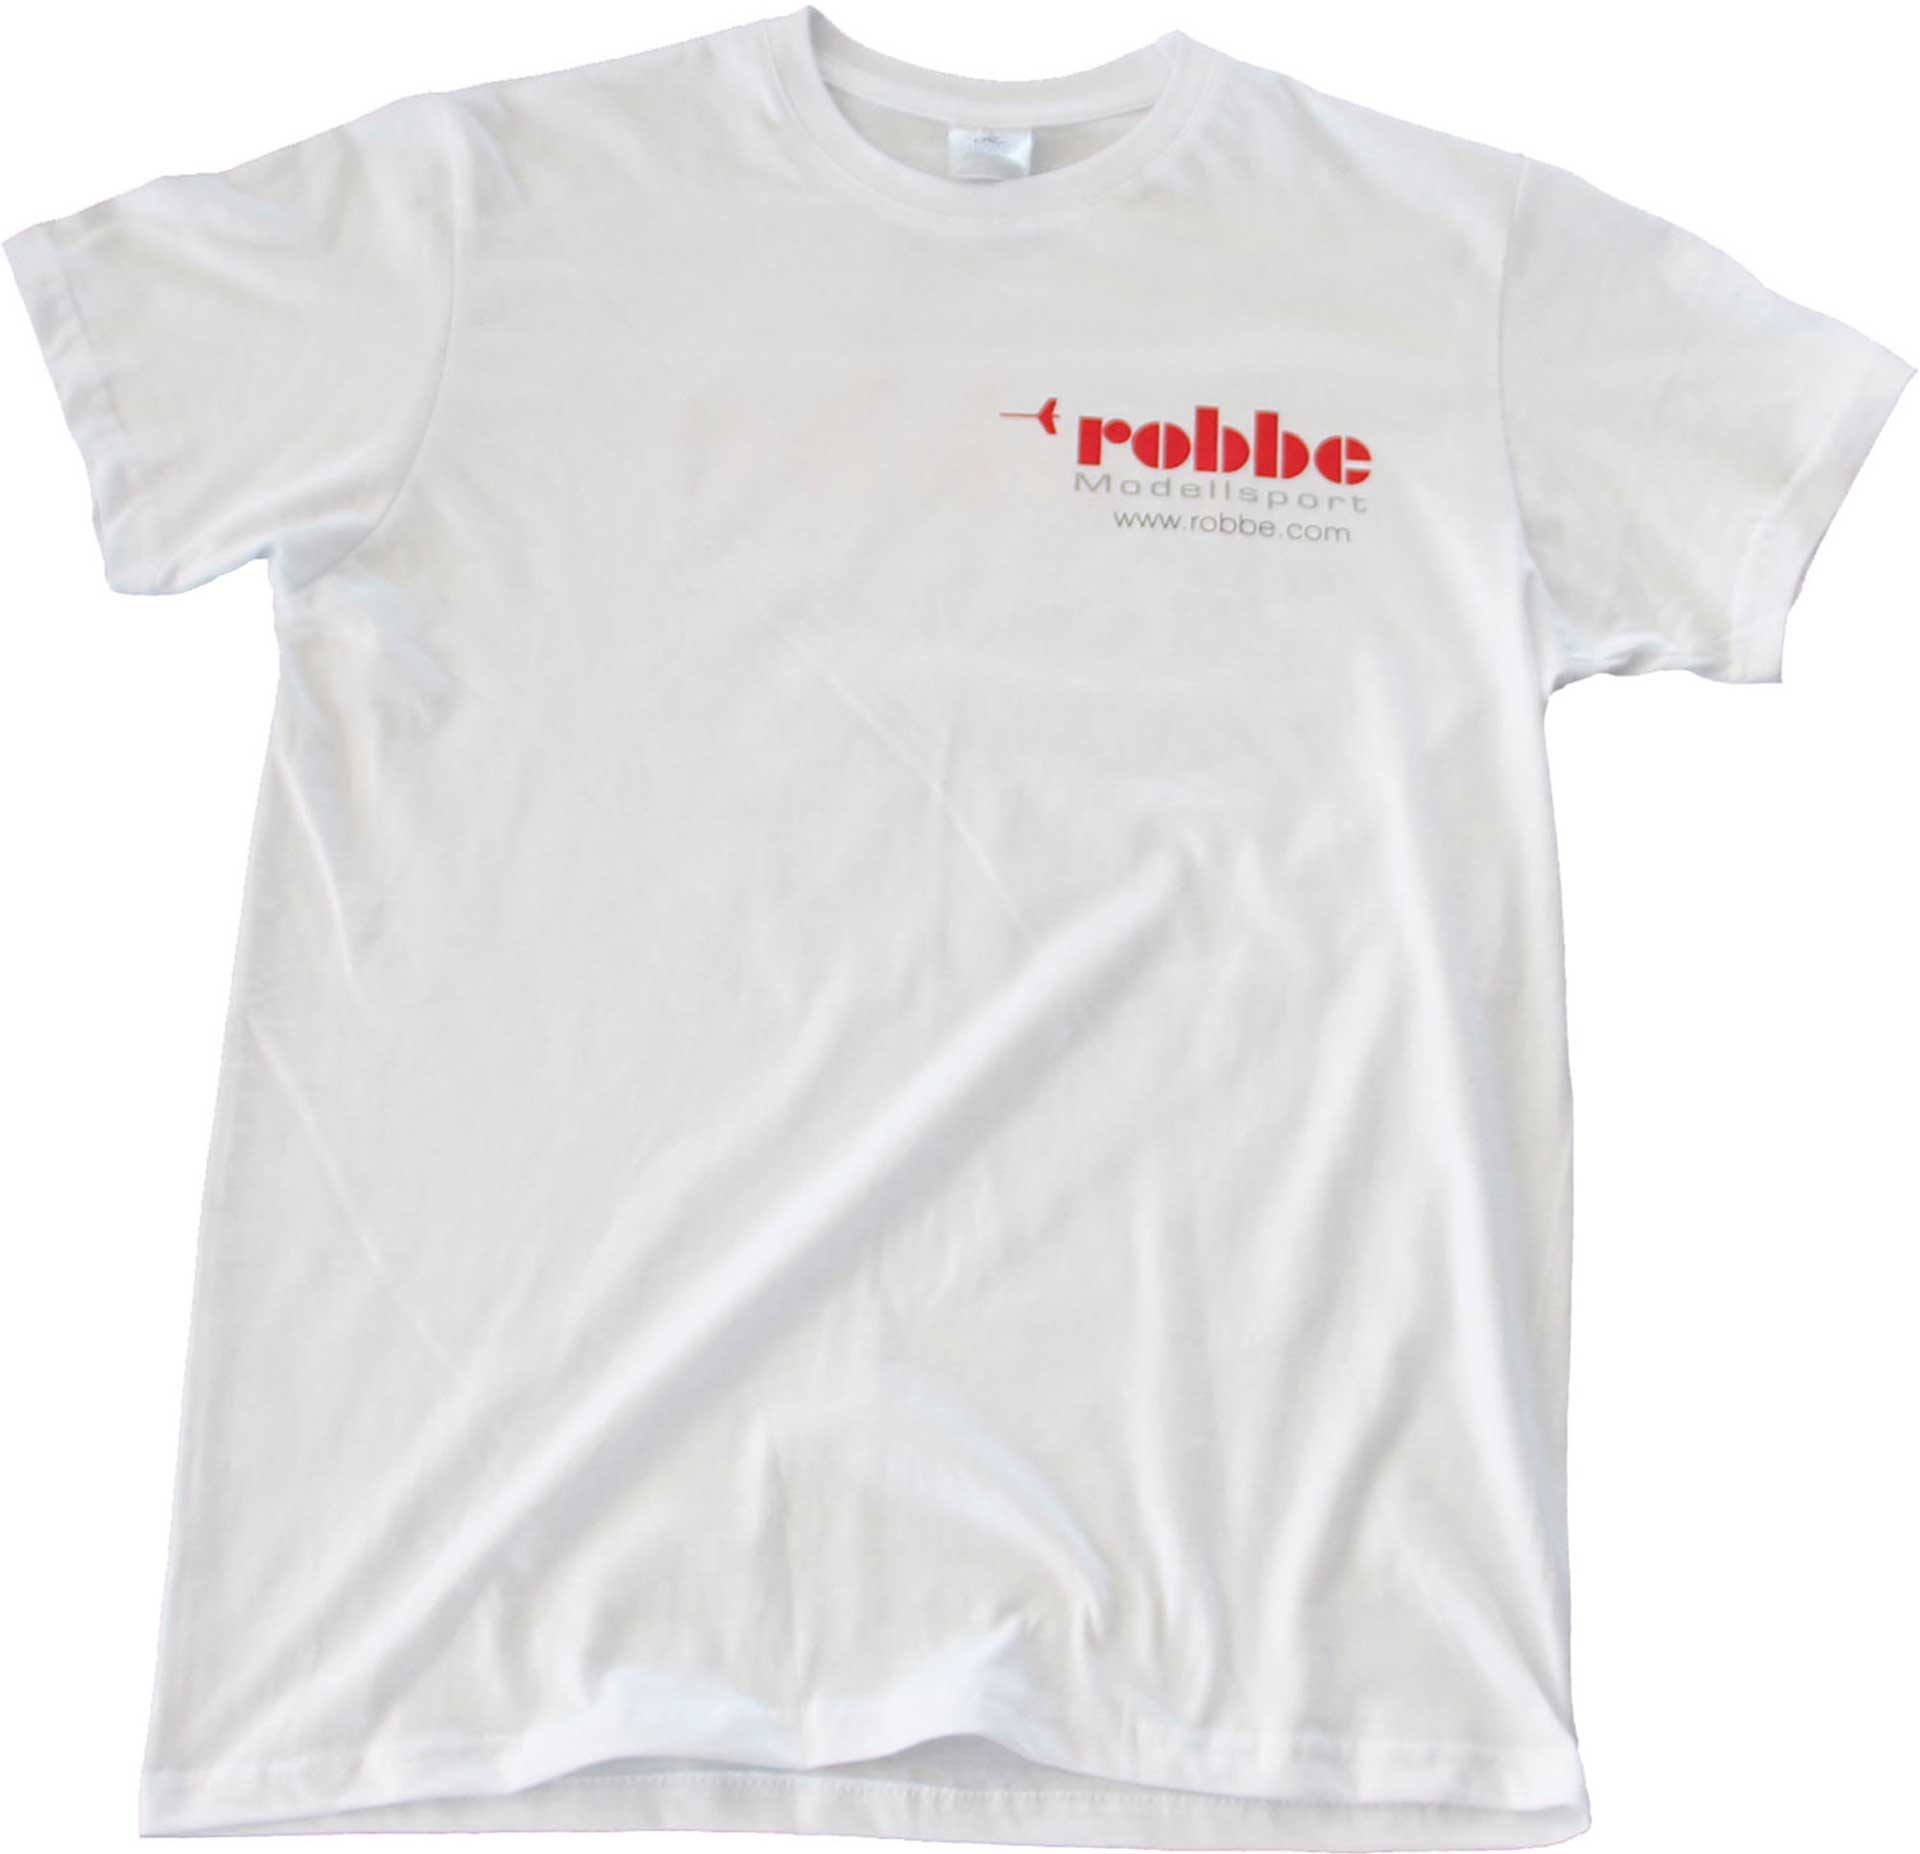 Robbe Modellsport T-SHIRT TAILLE XL